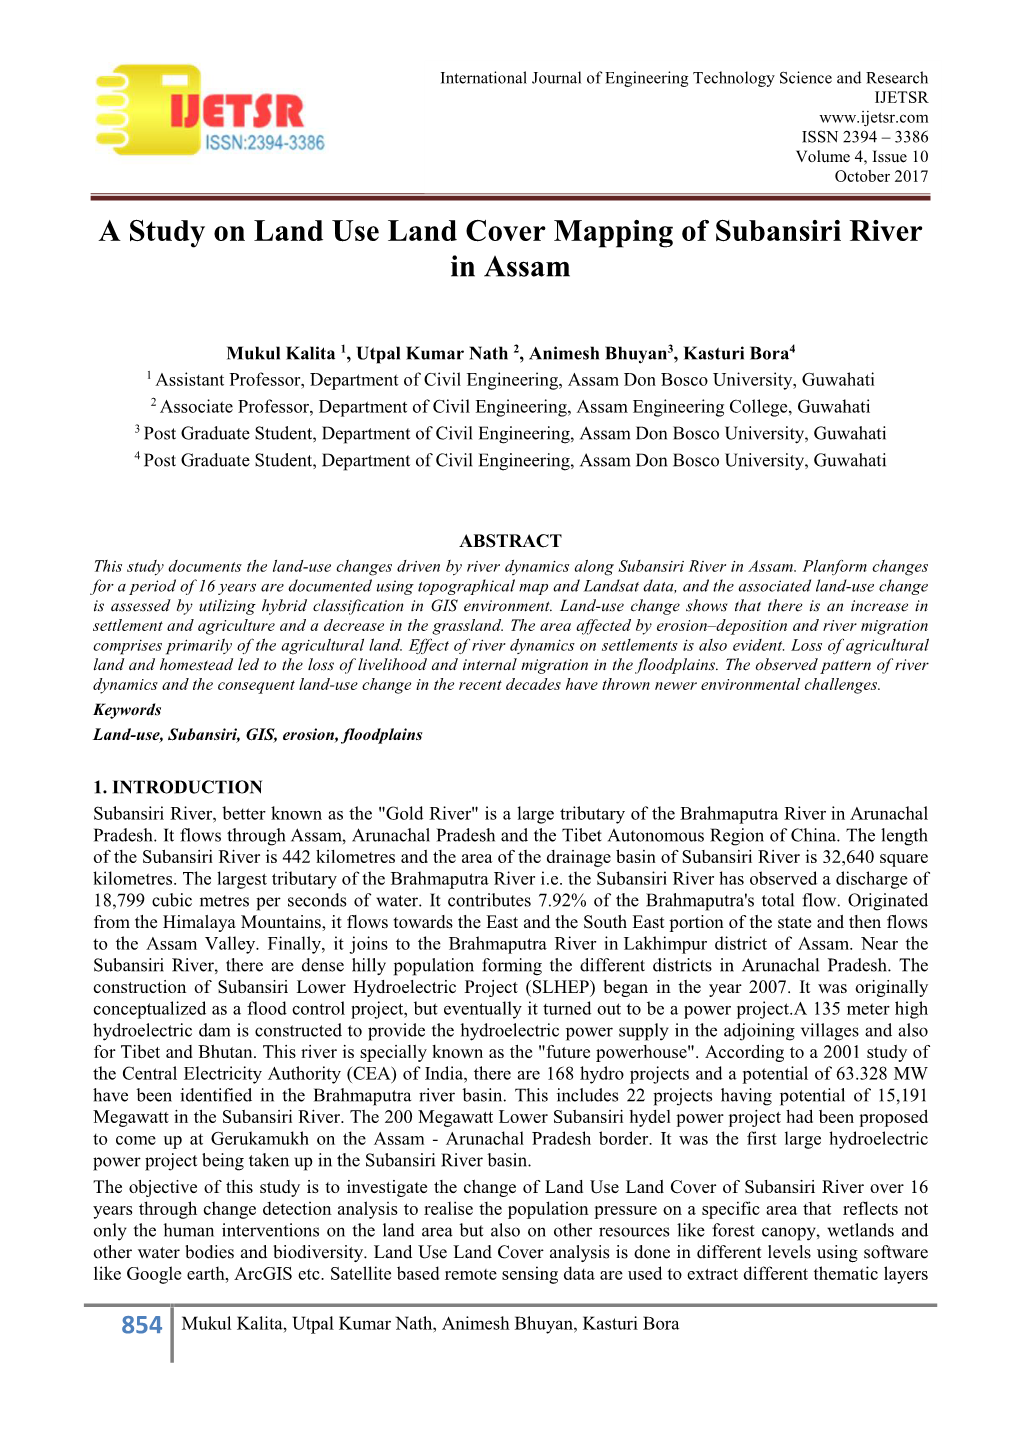 A Study on Land Use Land Cover Mapping of Subansiri River in Assam